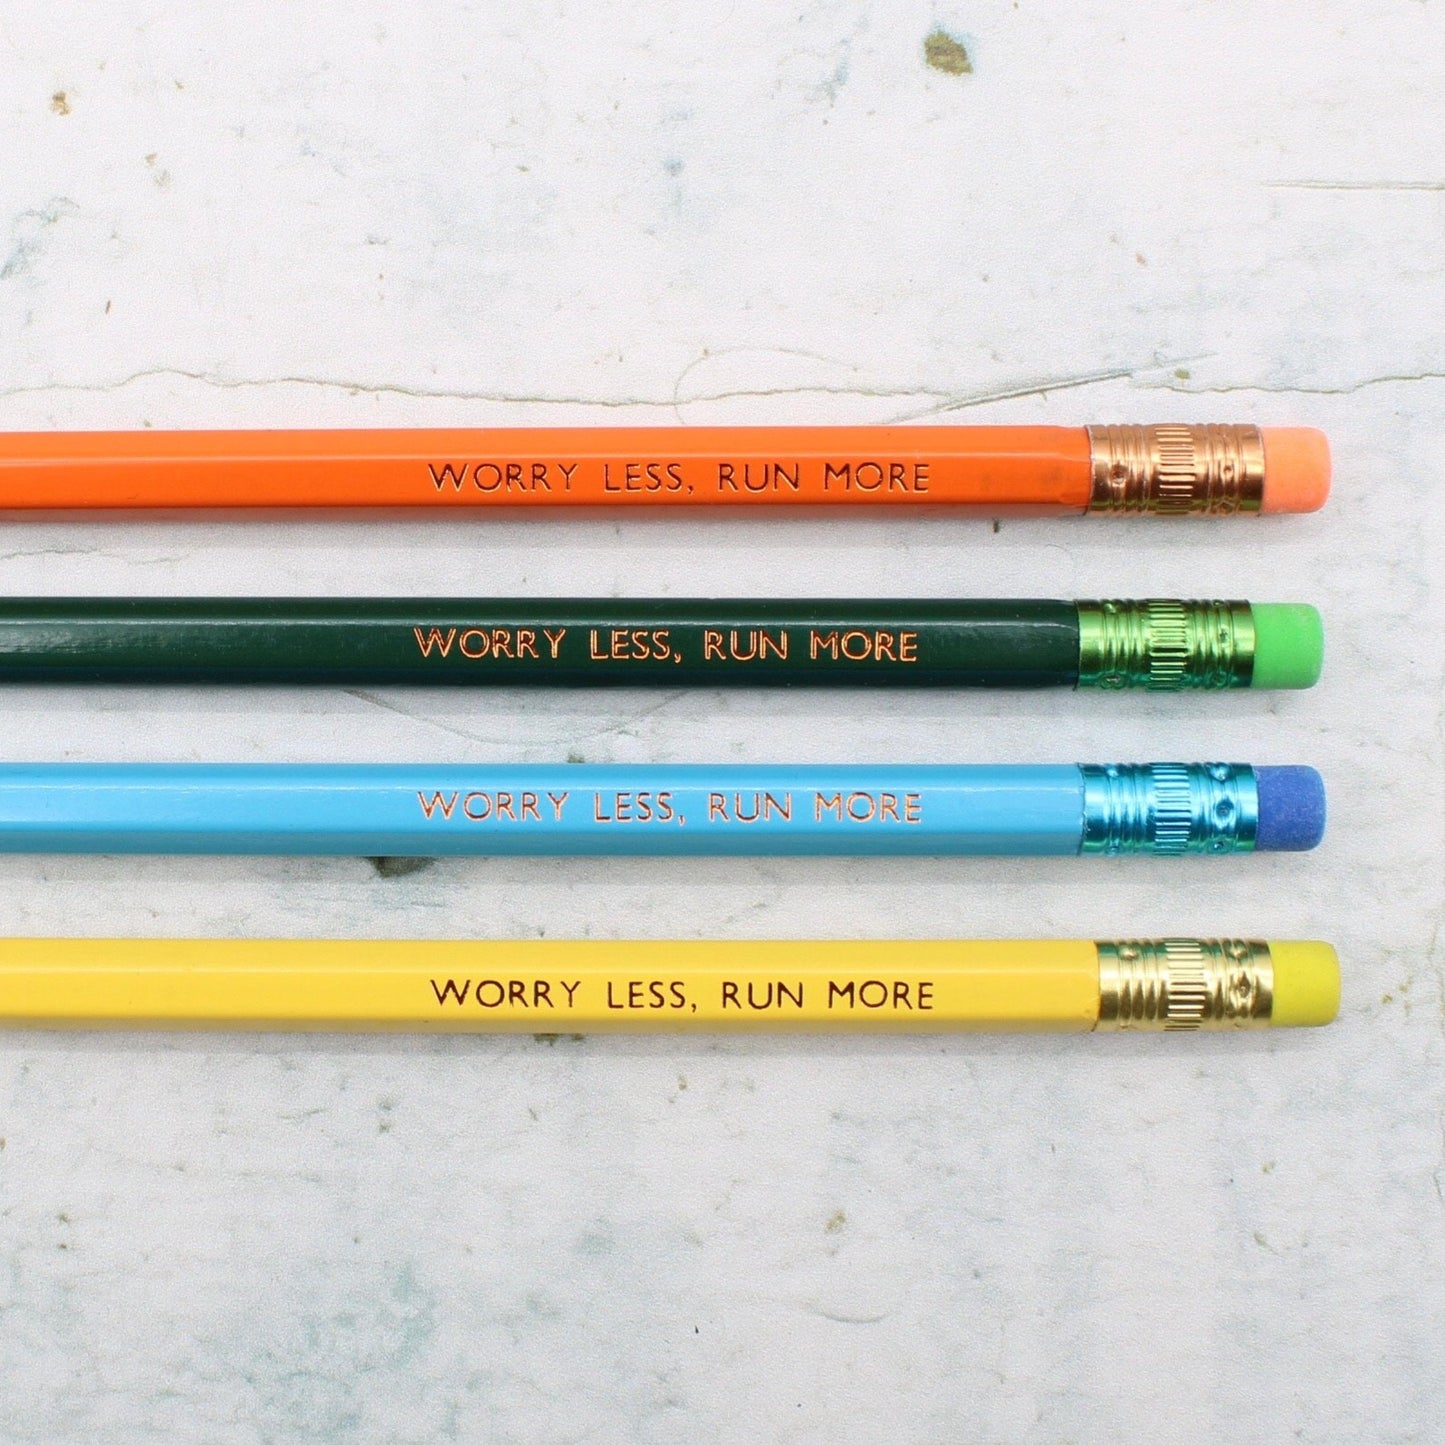 Printed Pencil - Worry less, run more